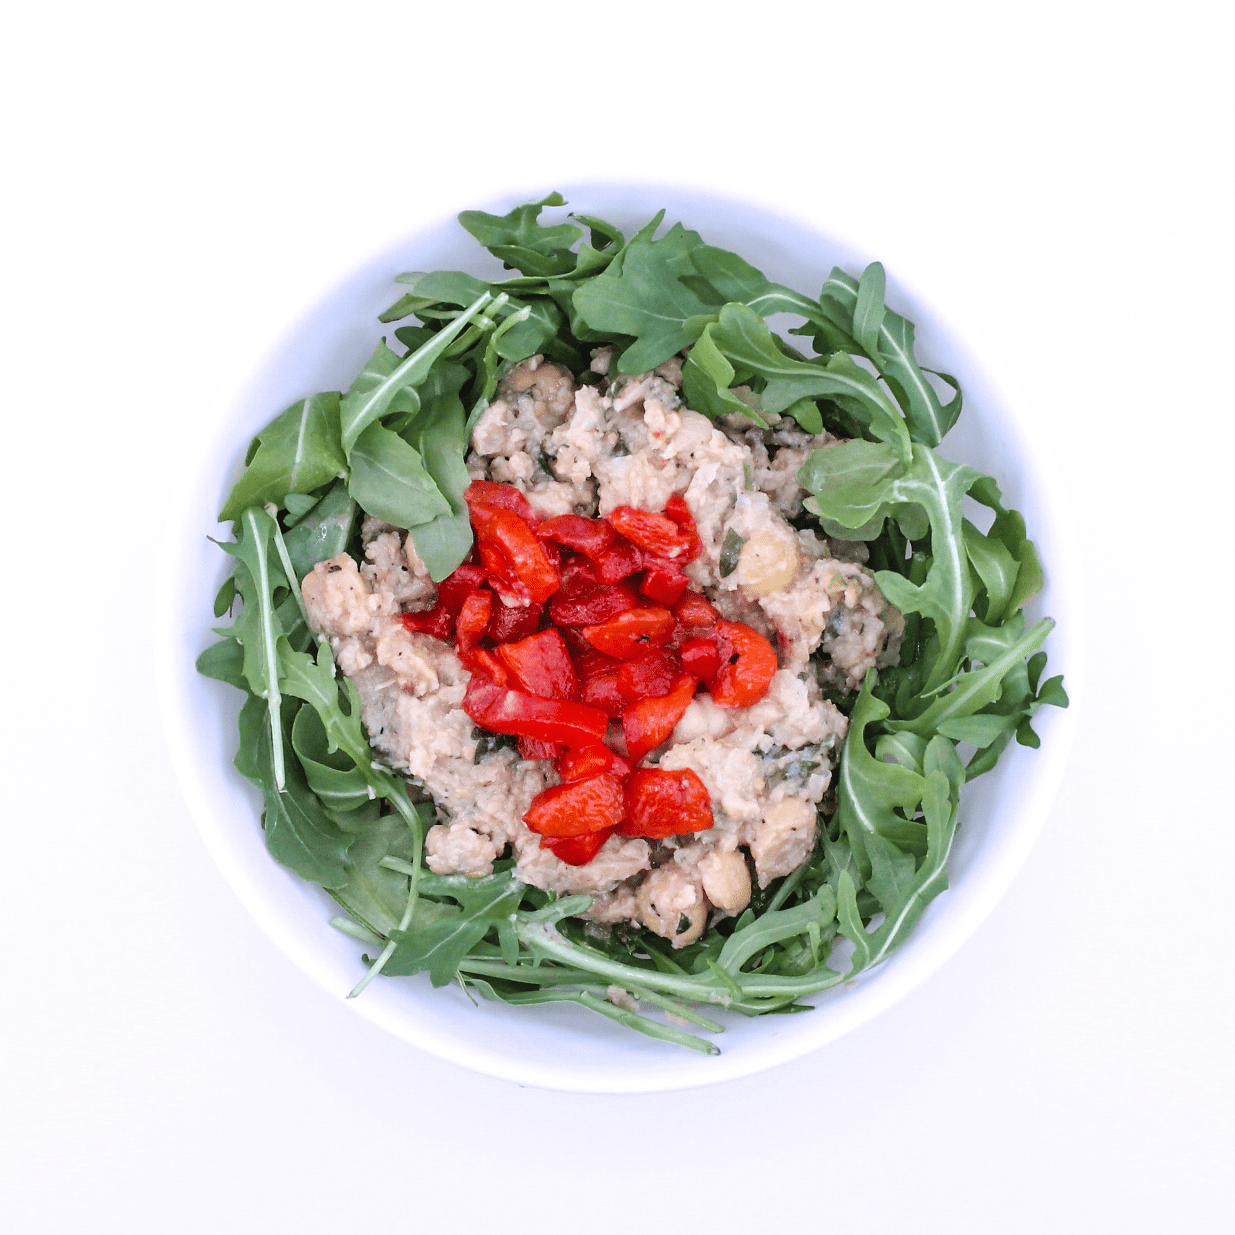 Marinated Chickpeas - Marinated chopped chickpeas, roasted red peppers, arugula